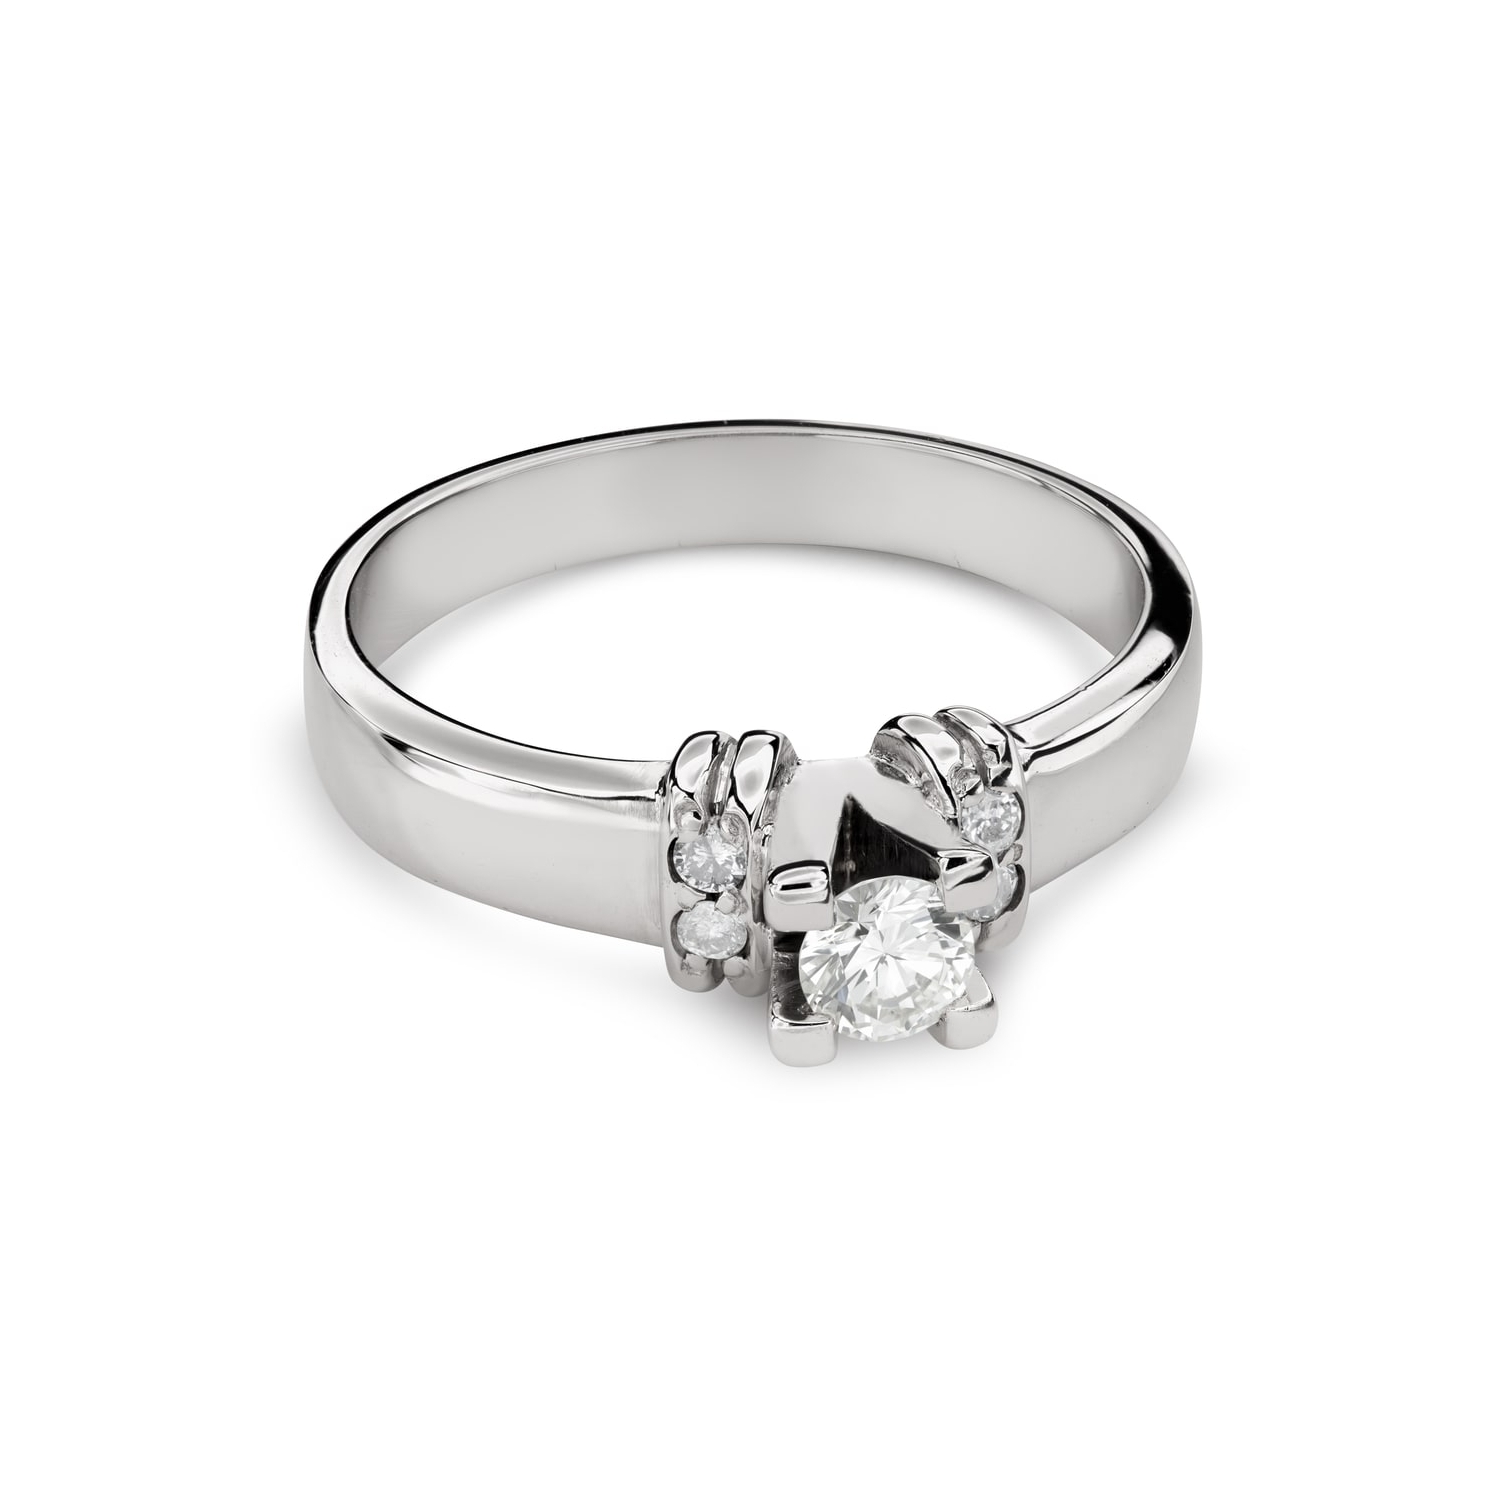 Engagment ring with brilliants "Grace 127"